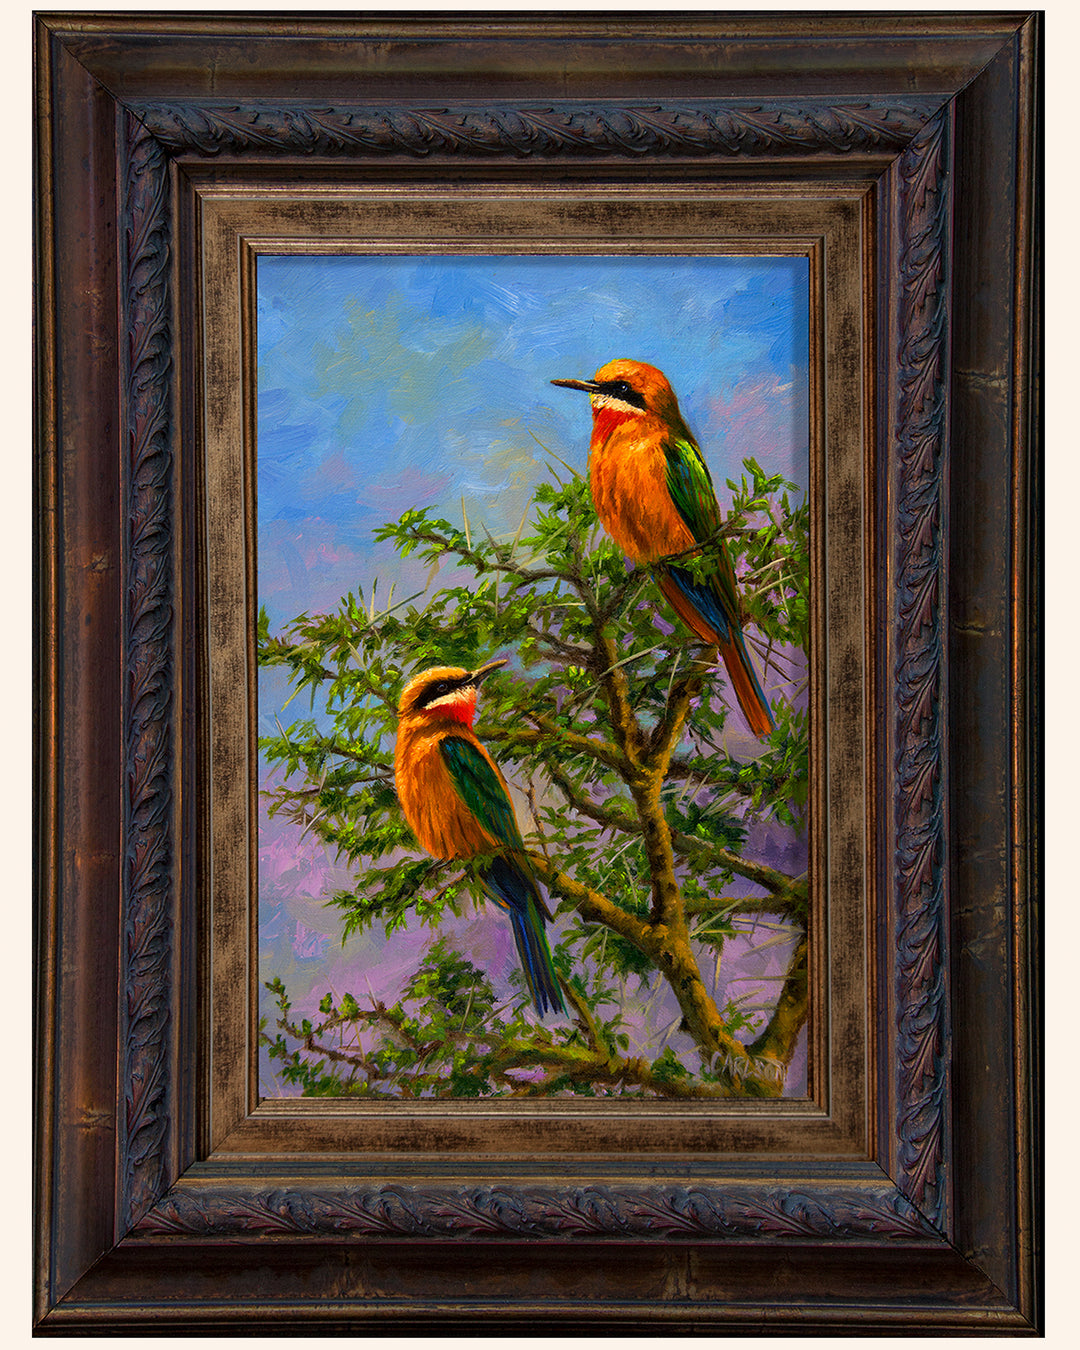 Bee-eaters